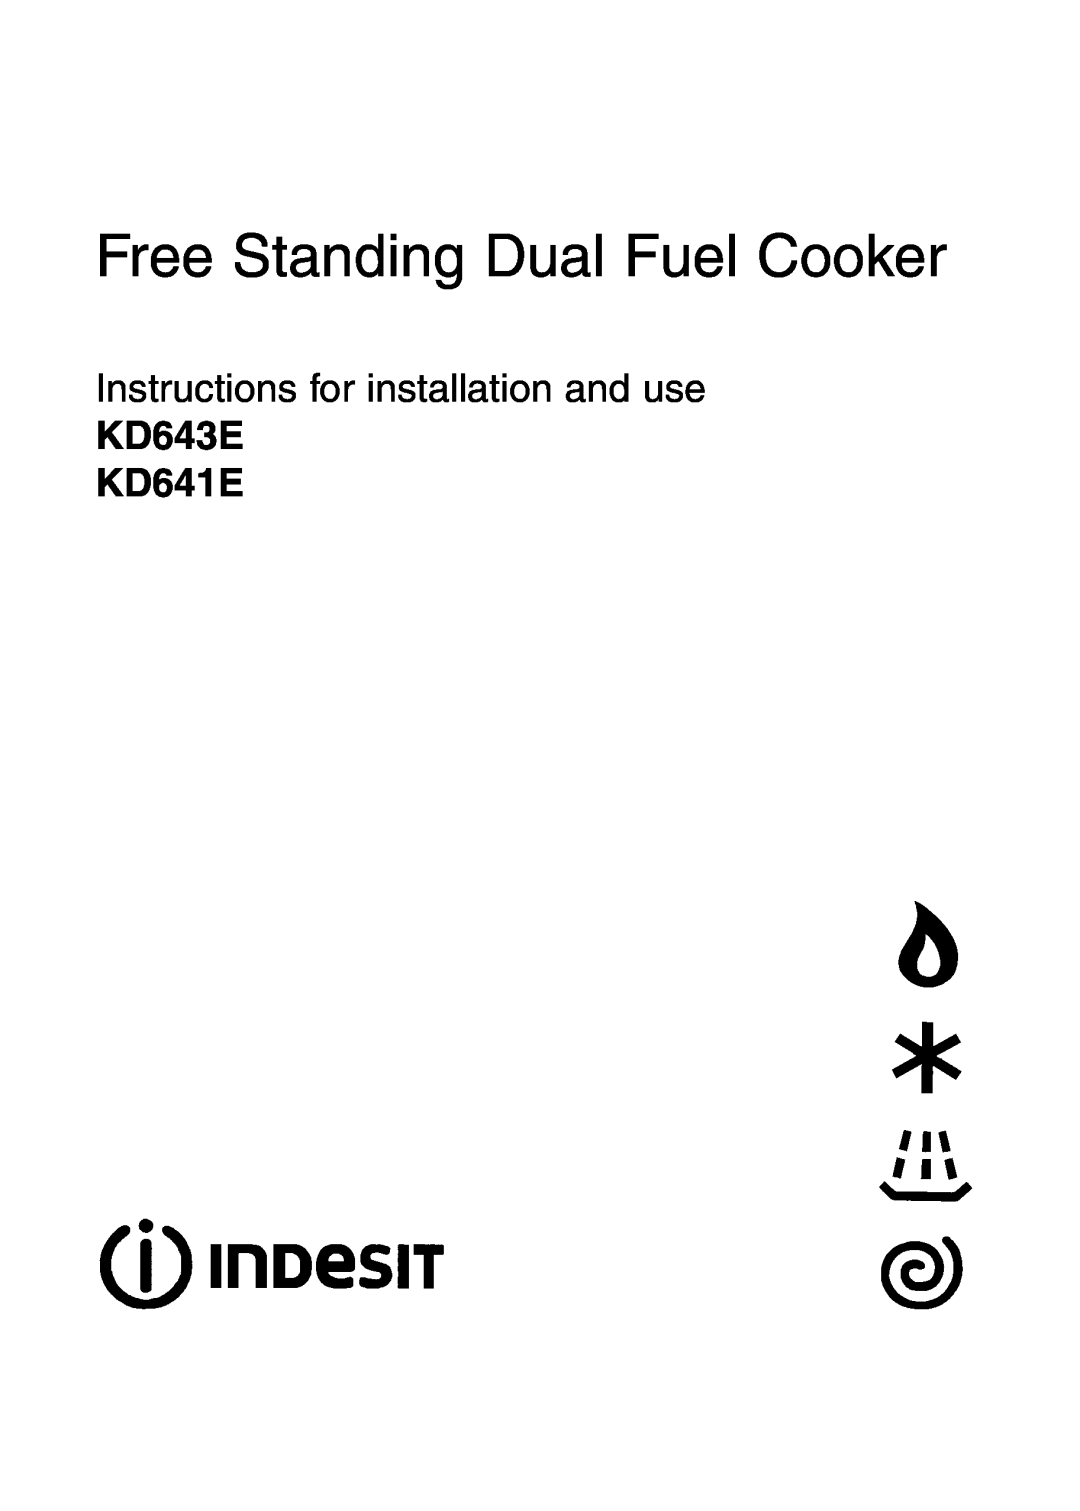 Indesit manual Free Standing Dual Fuel Cooker, Instructions for installation and use, KD643E KD641E 